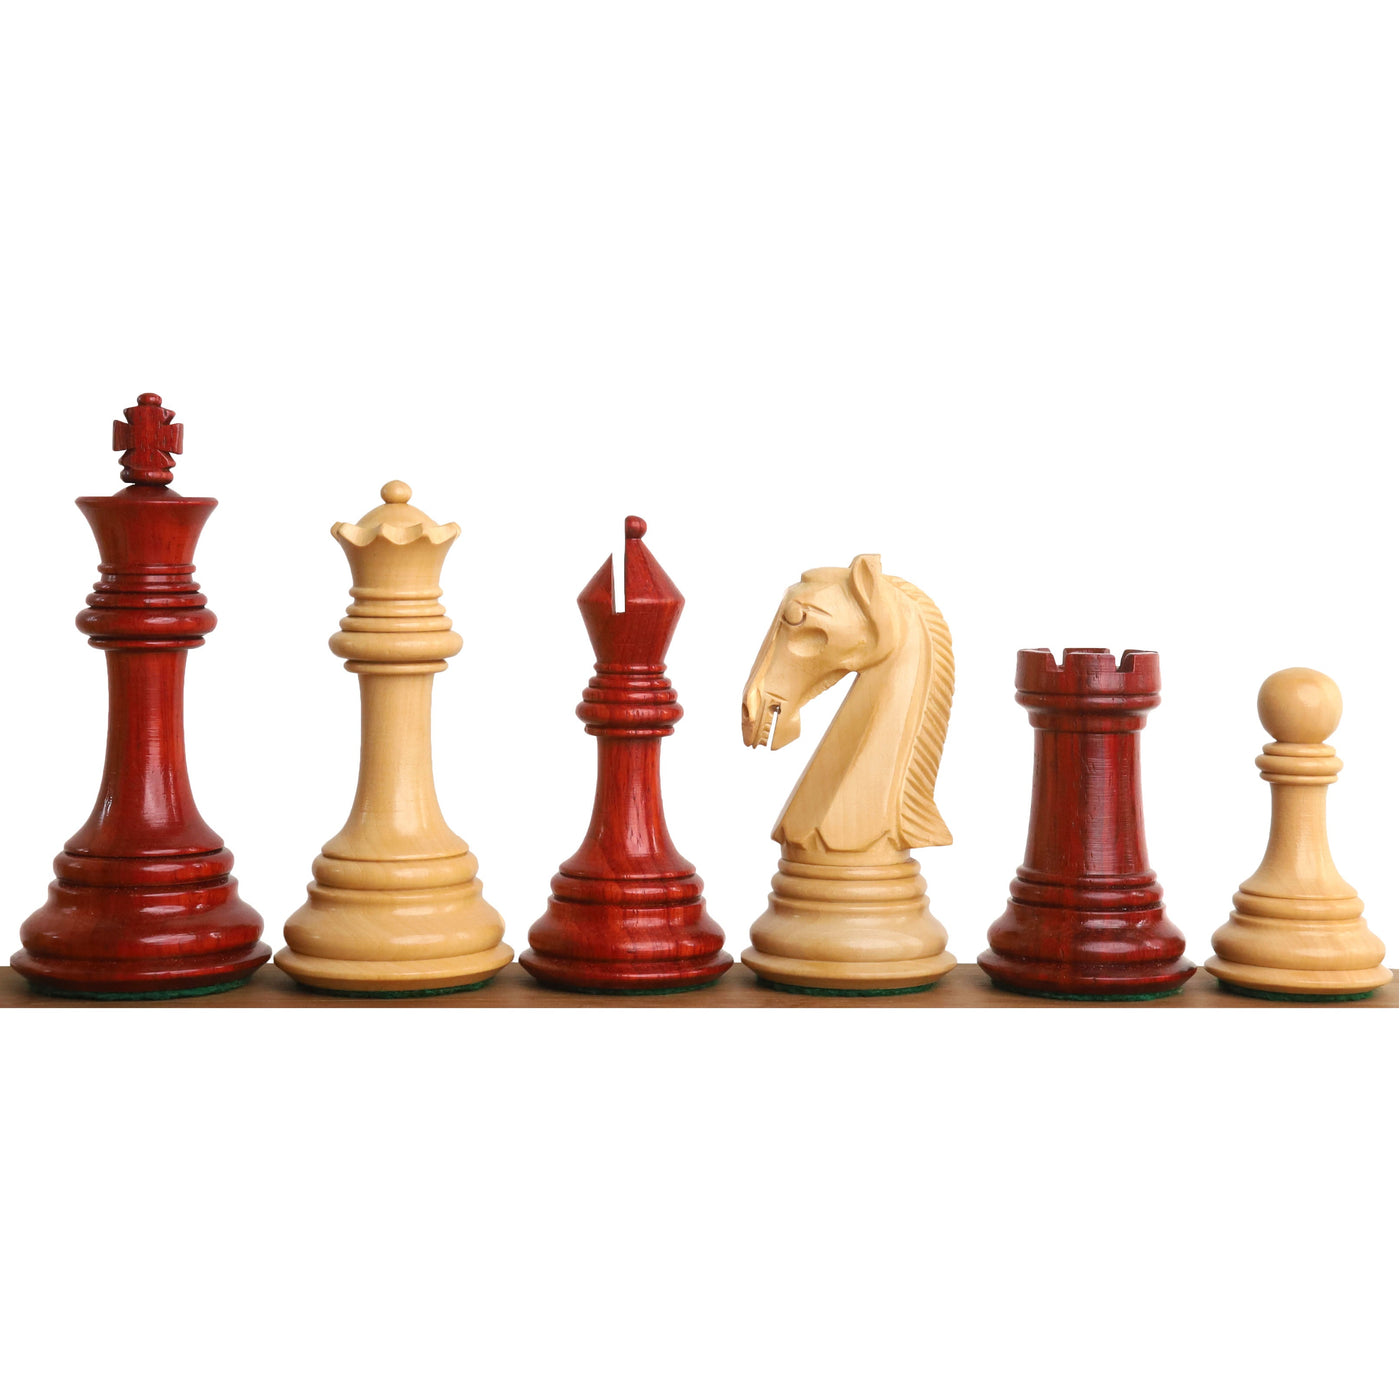 3.9" New Columbian Staunton Chess Set - Chess Pieces Only -Bud Rosewood- Triple Weighted